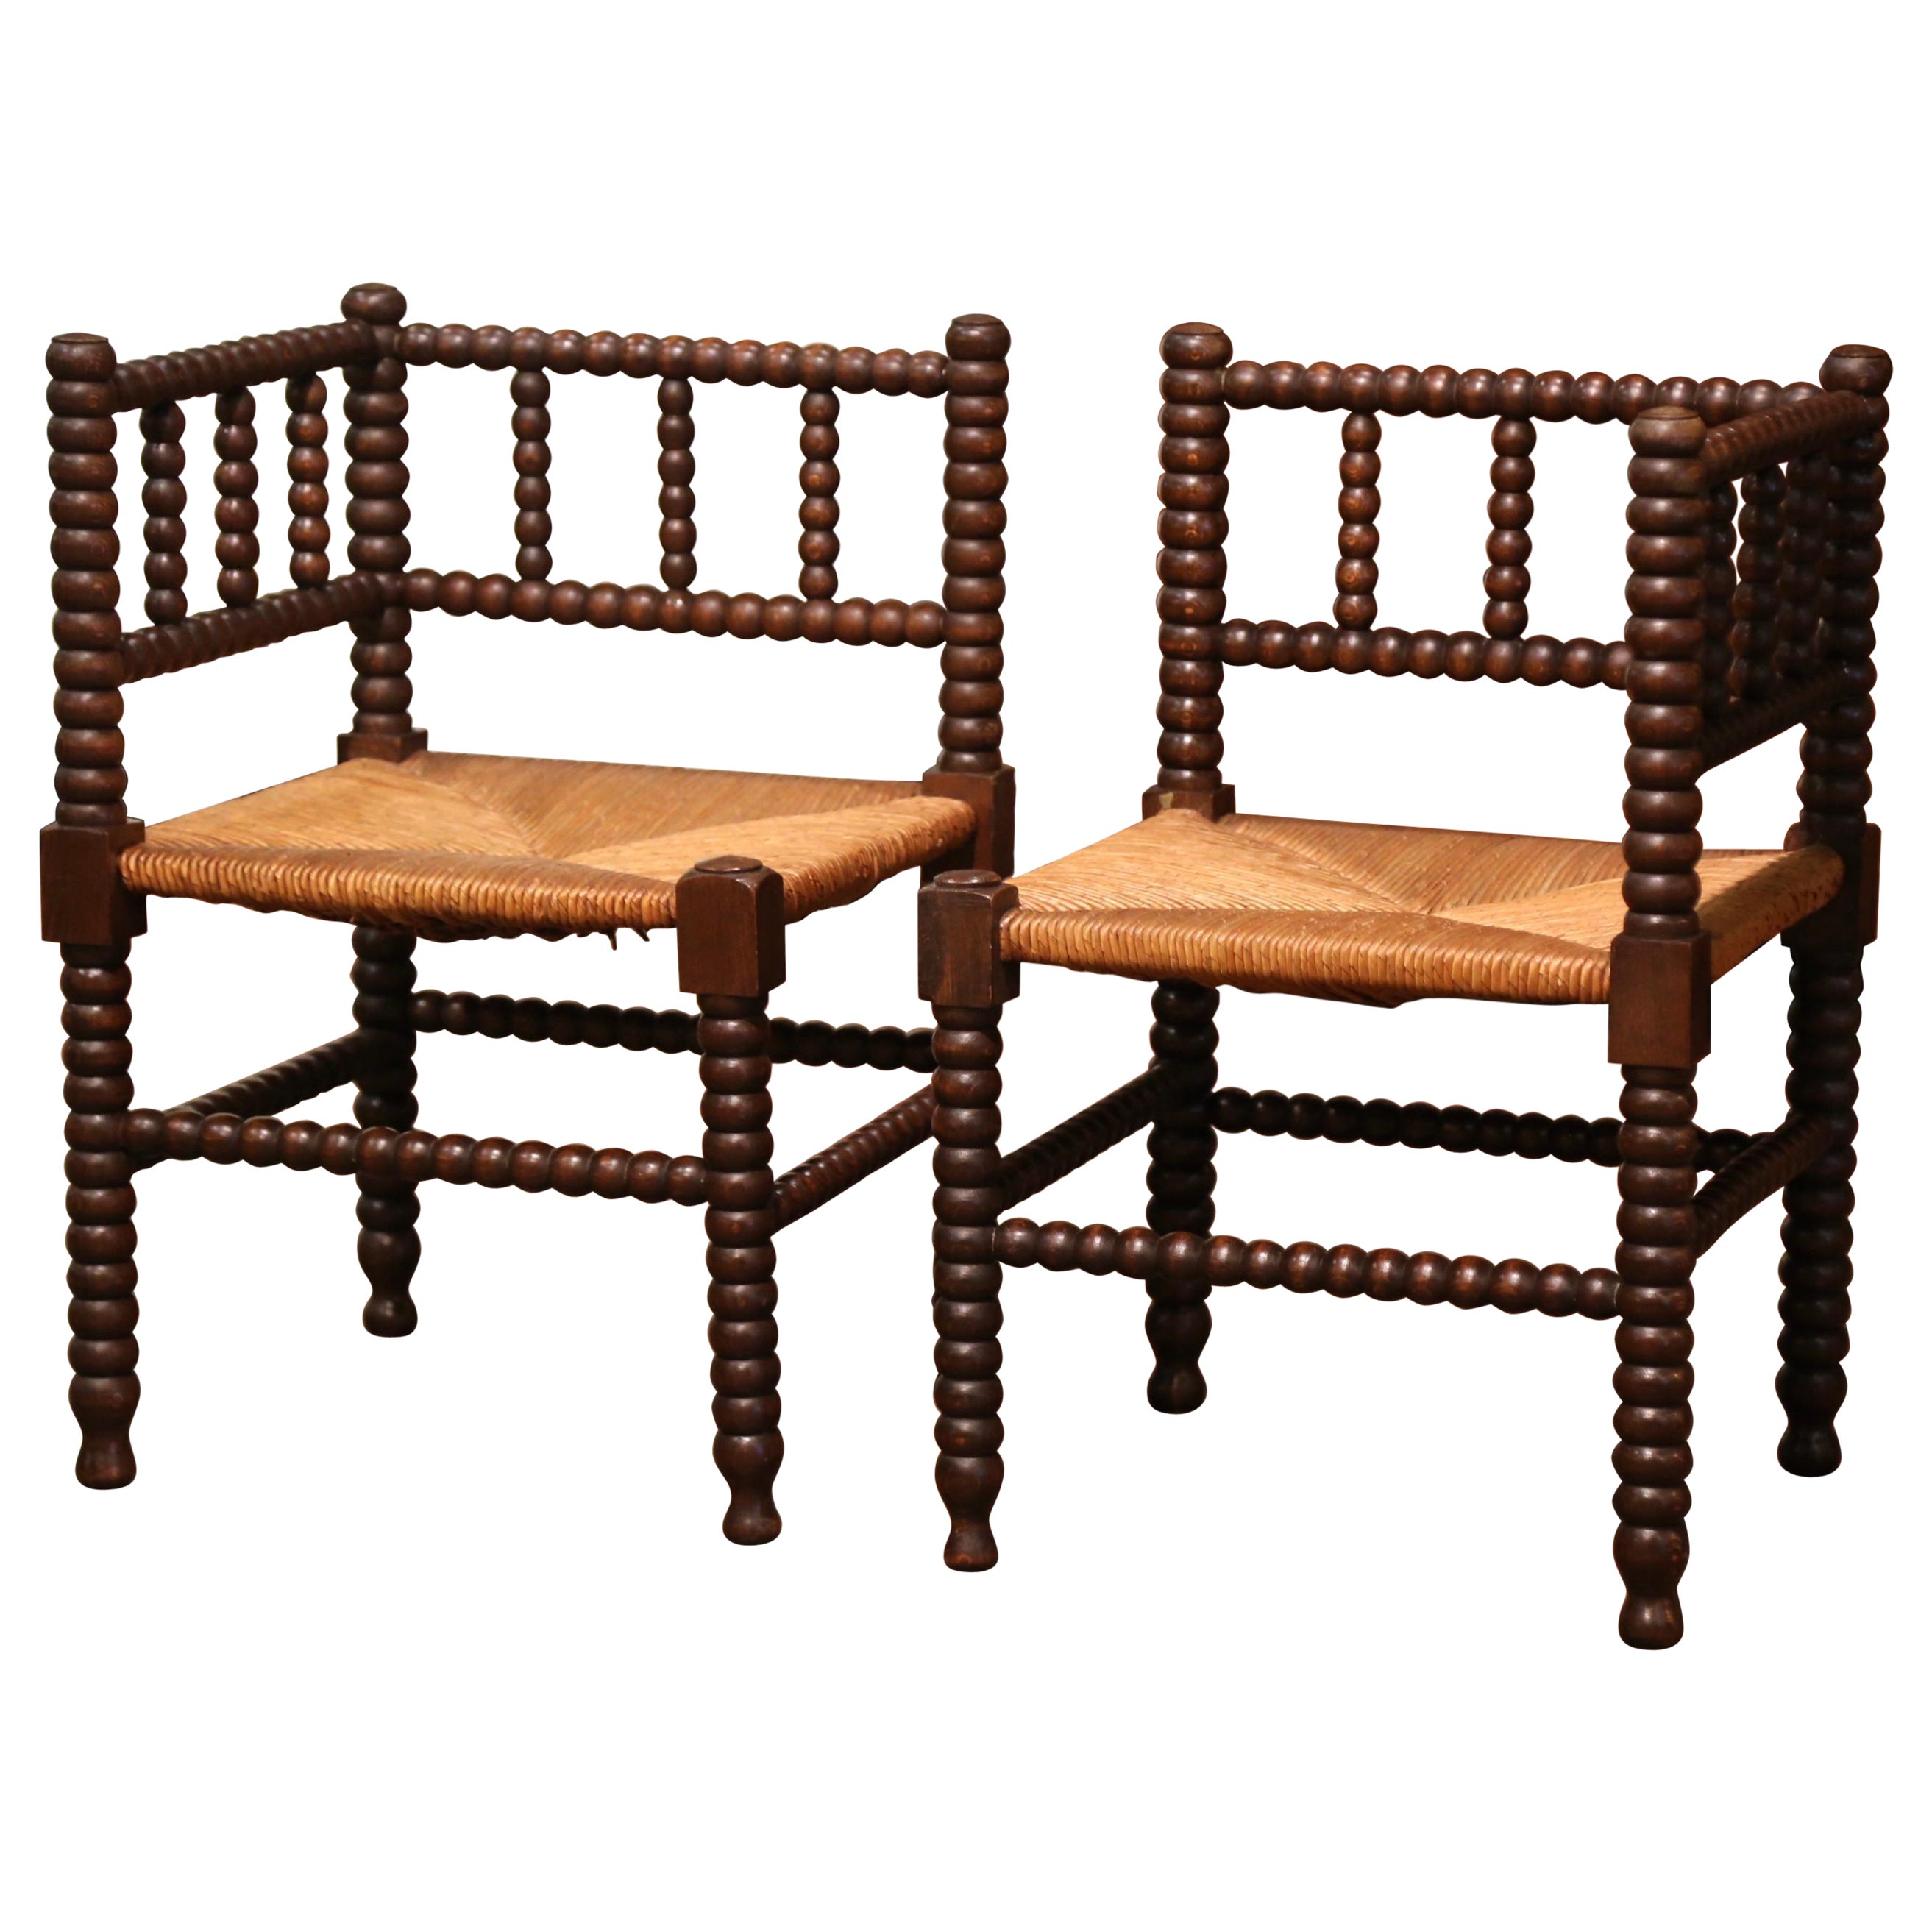 Pair of Mid-Century French Bobbin Turned Oak and Rush Seat Low Corner Chairs